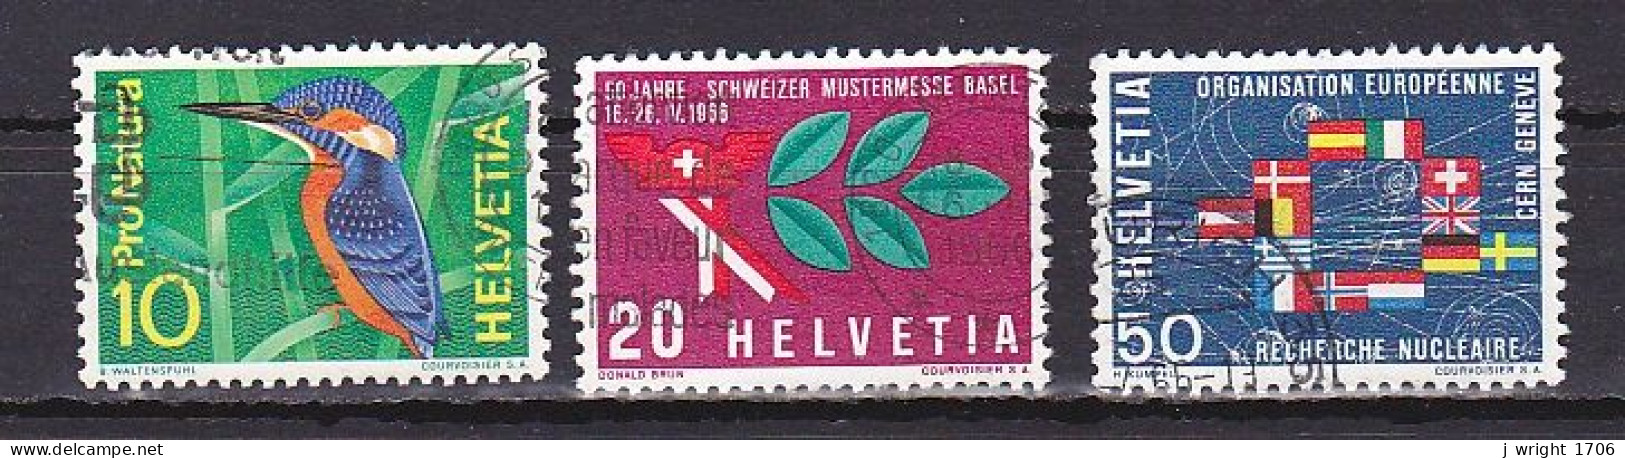 Switzerland, 1966, Publicity Issue, Set, USED - Used Stamps